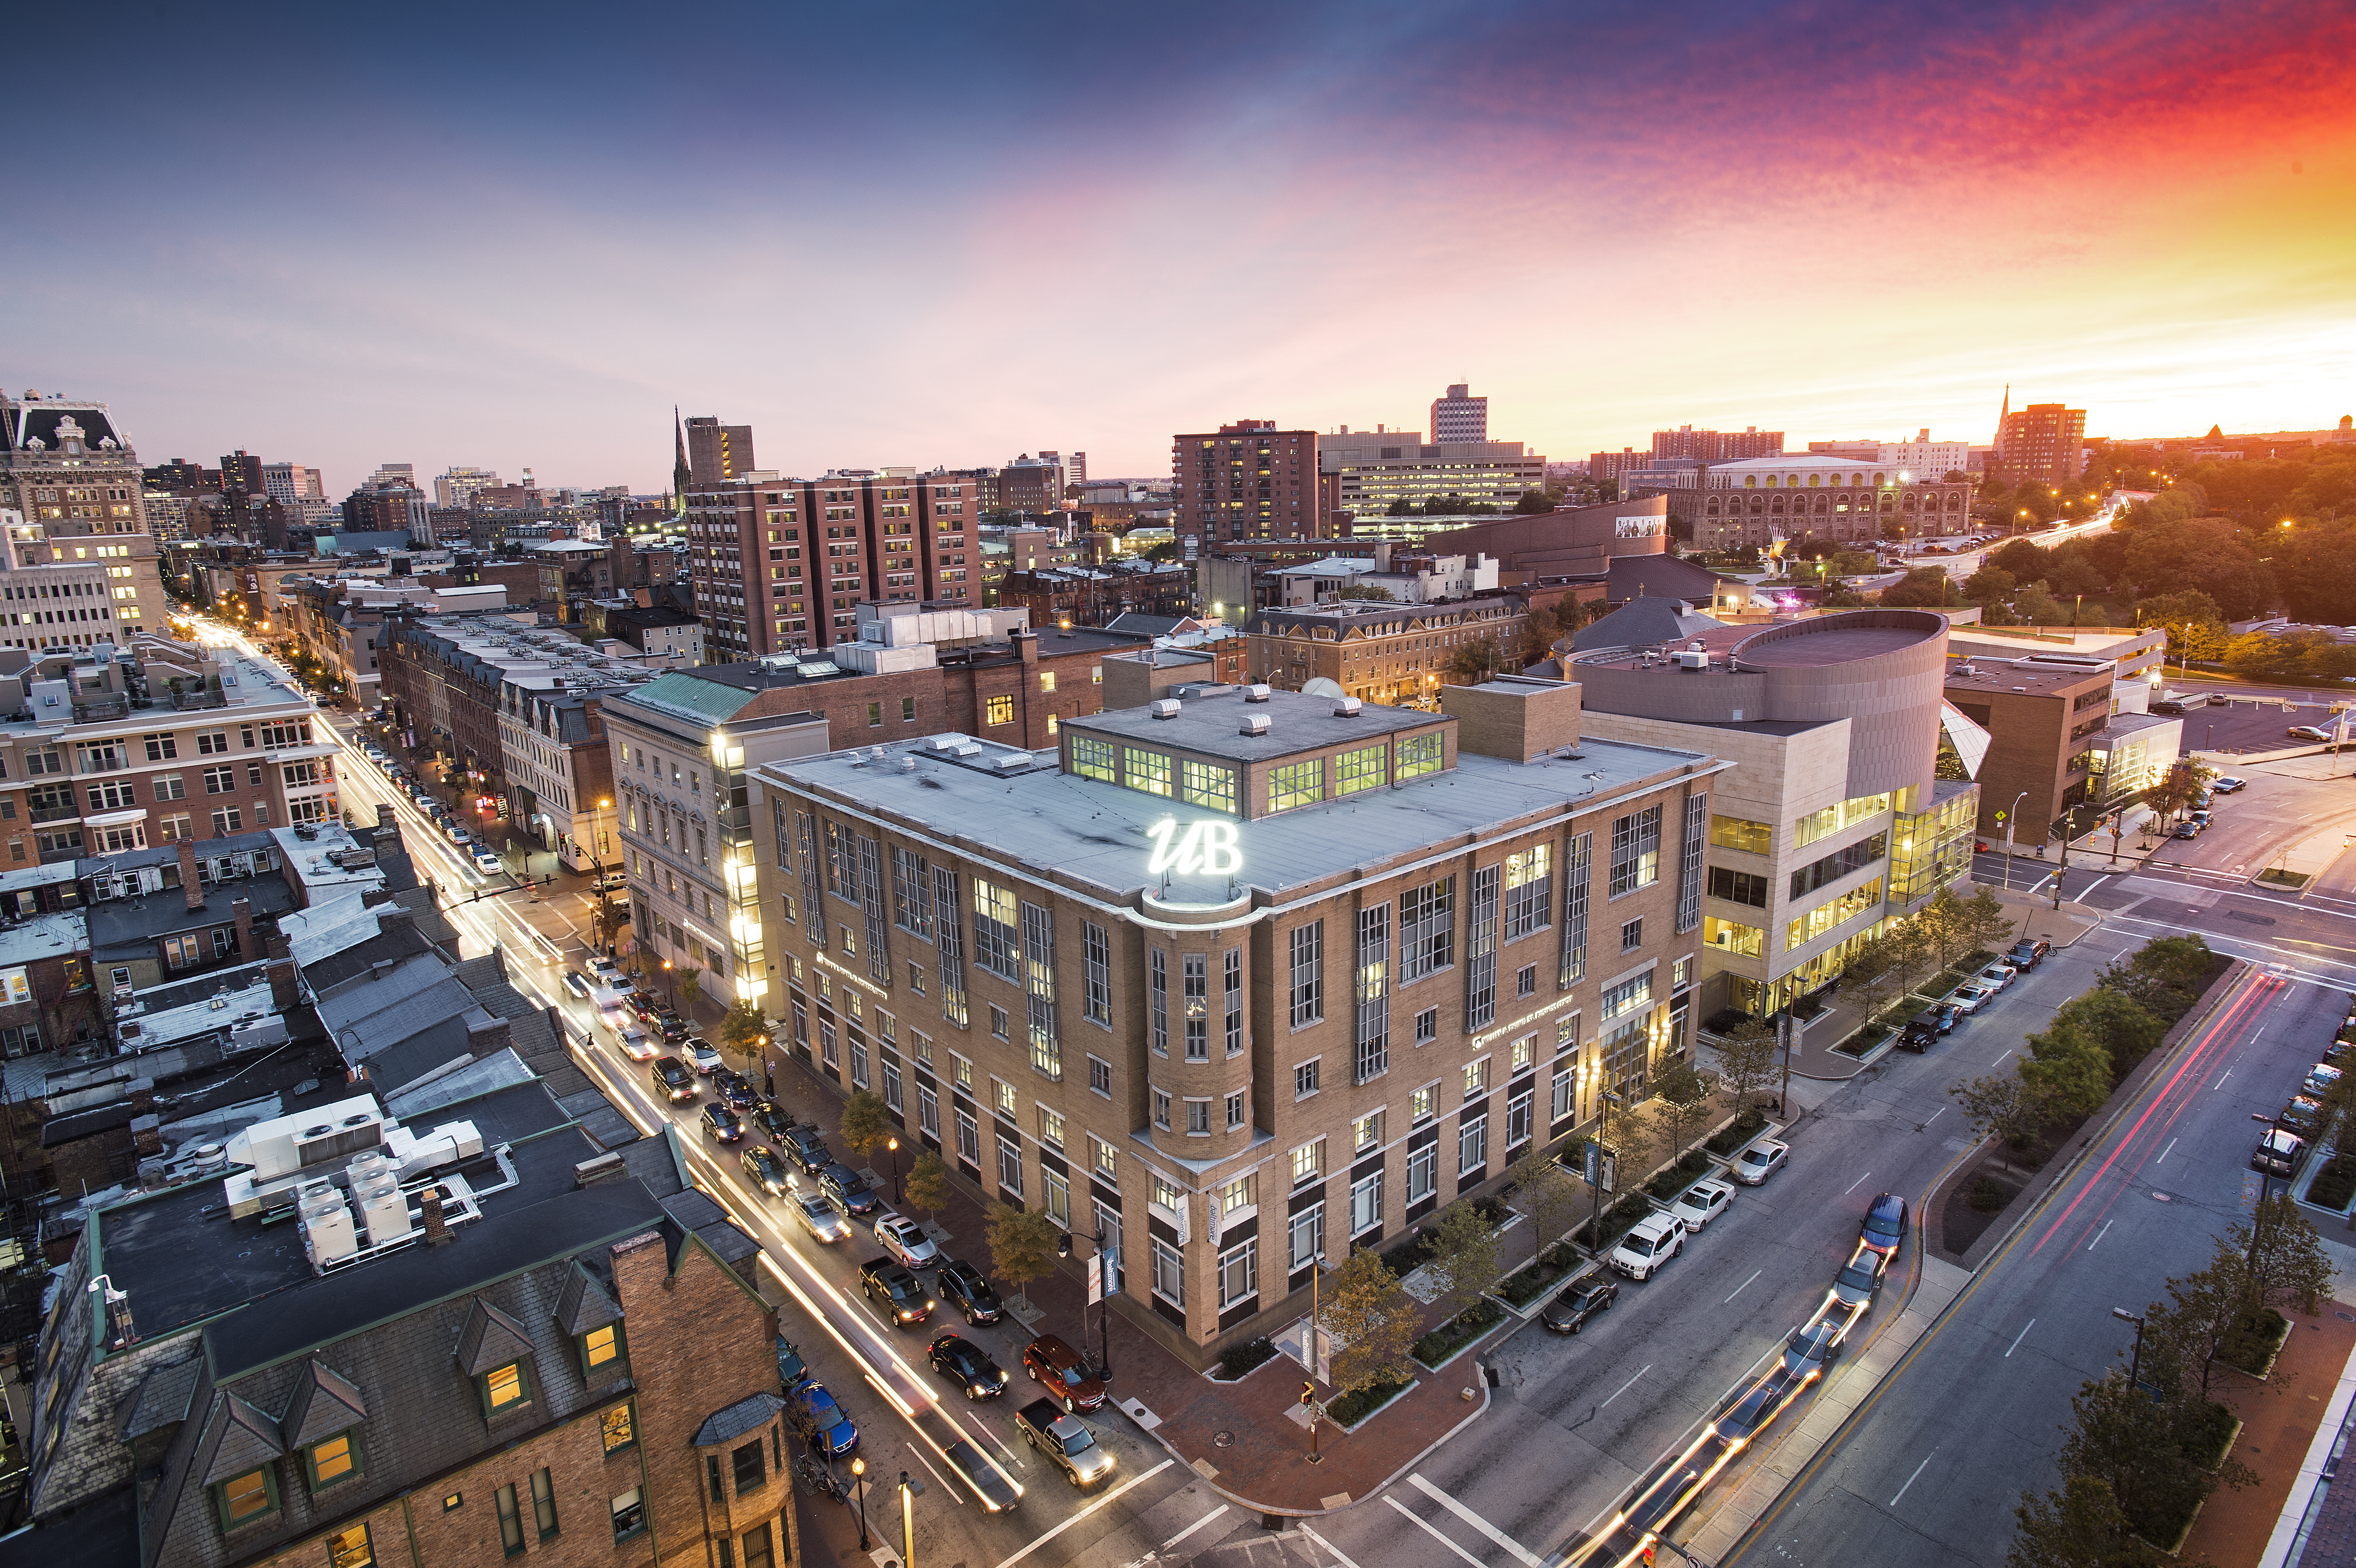 The University of Baltimore Business Center during Sunrise